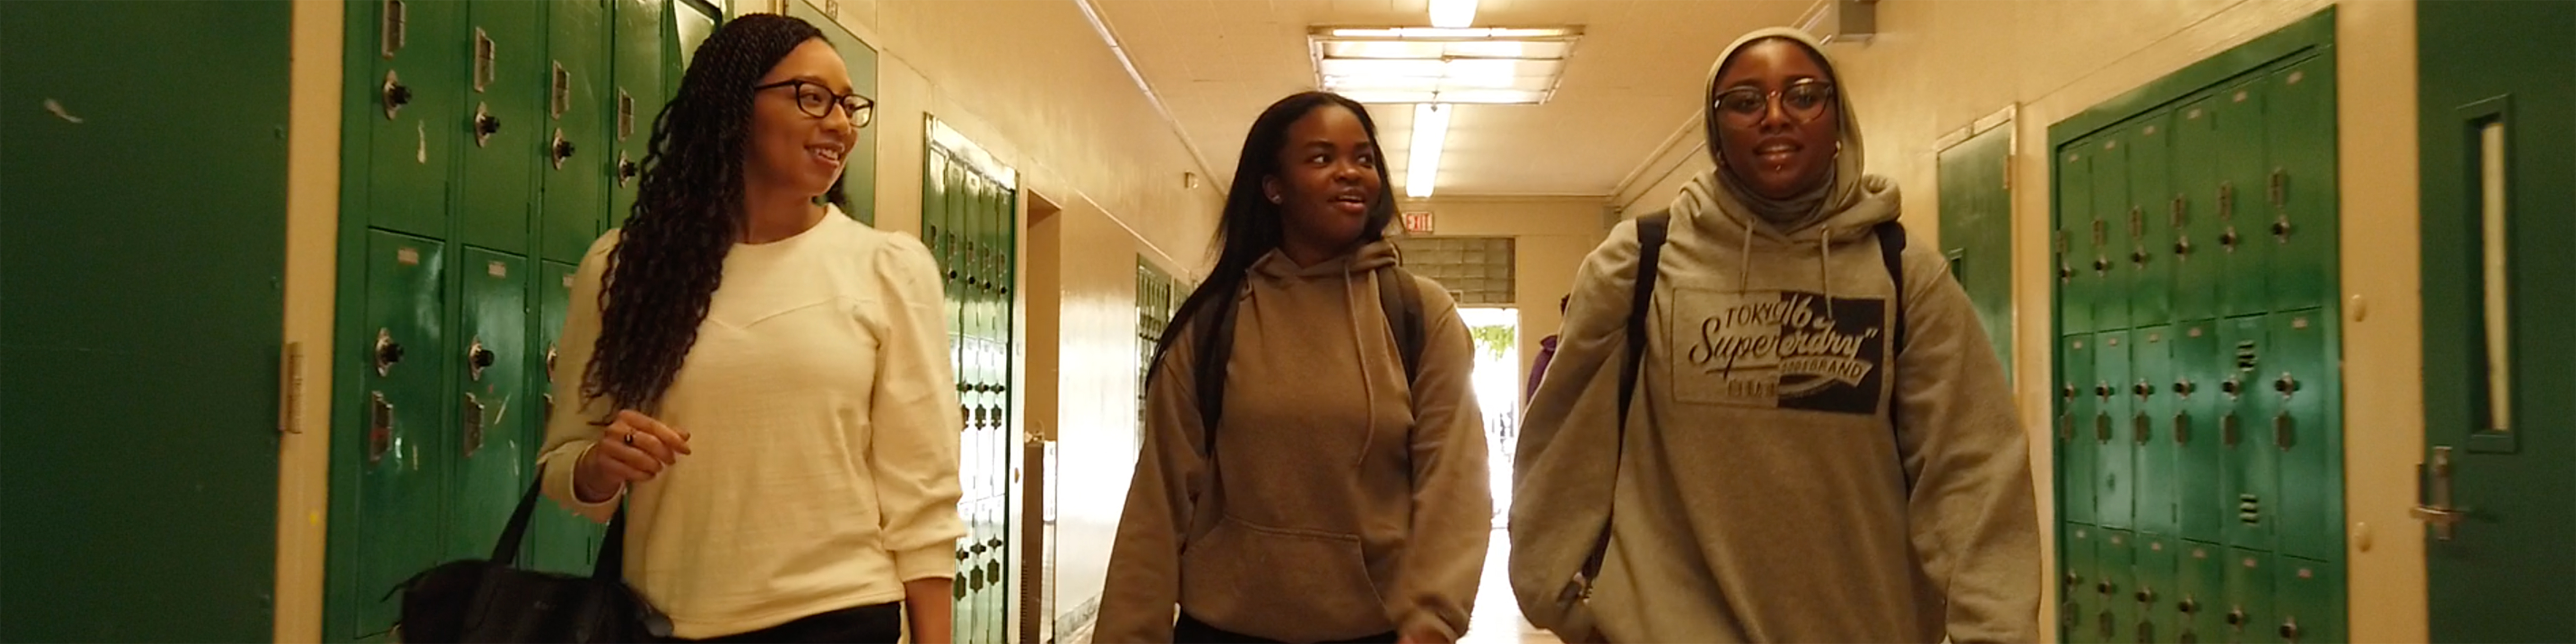 Brandi Waters, left, walks with two black female students down a high school hallway lined with green lockers